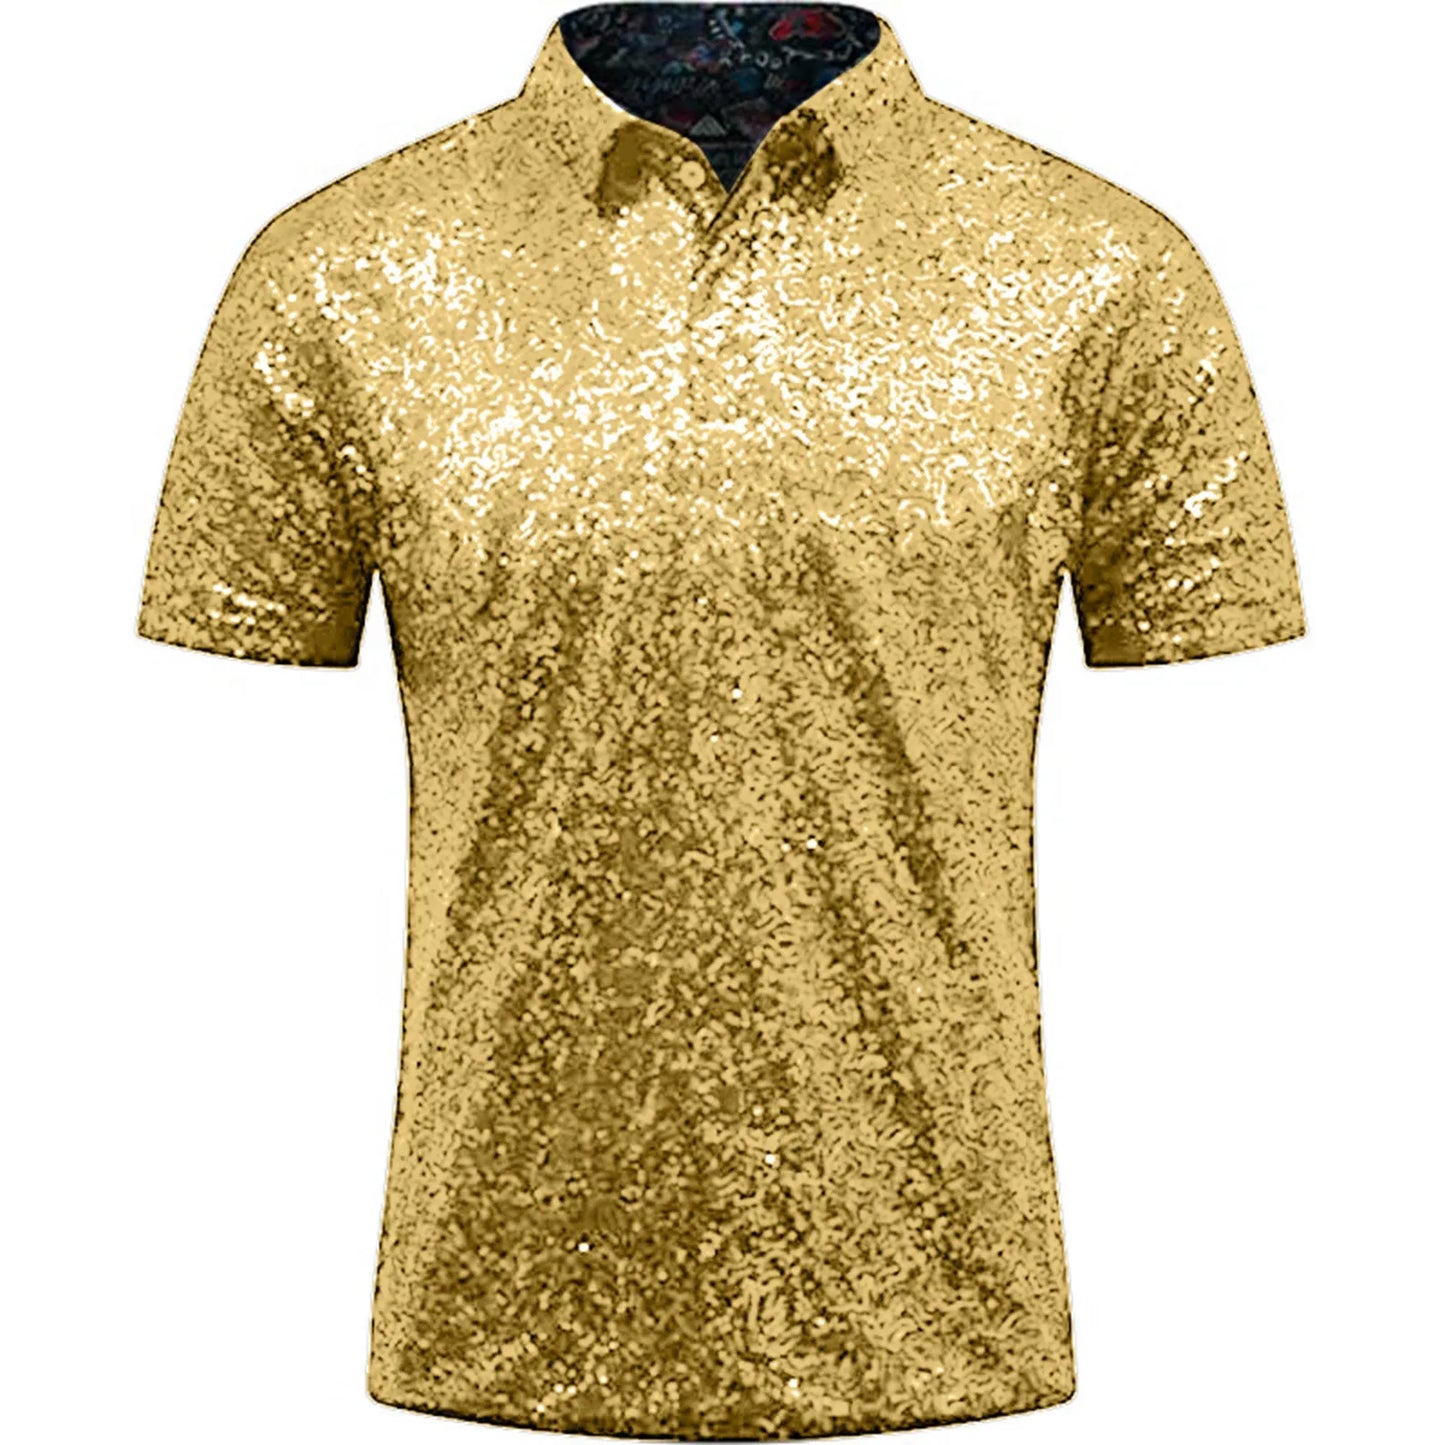 Men's Relaxed Short Sleeve Turndown Sparkles Sequins Polos Shirts 70s Disco Nightclub Party